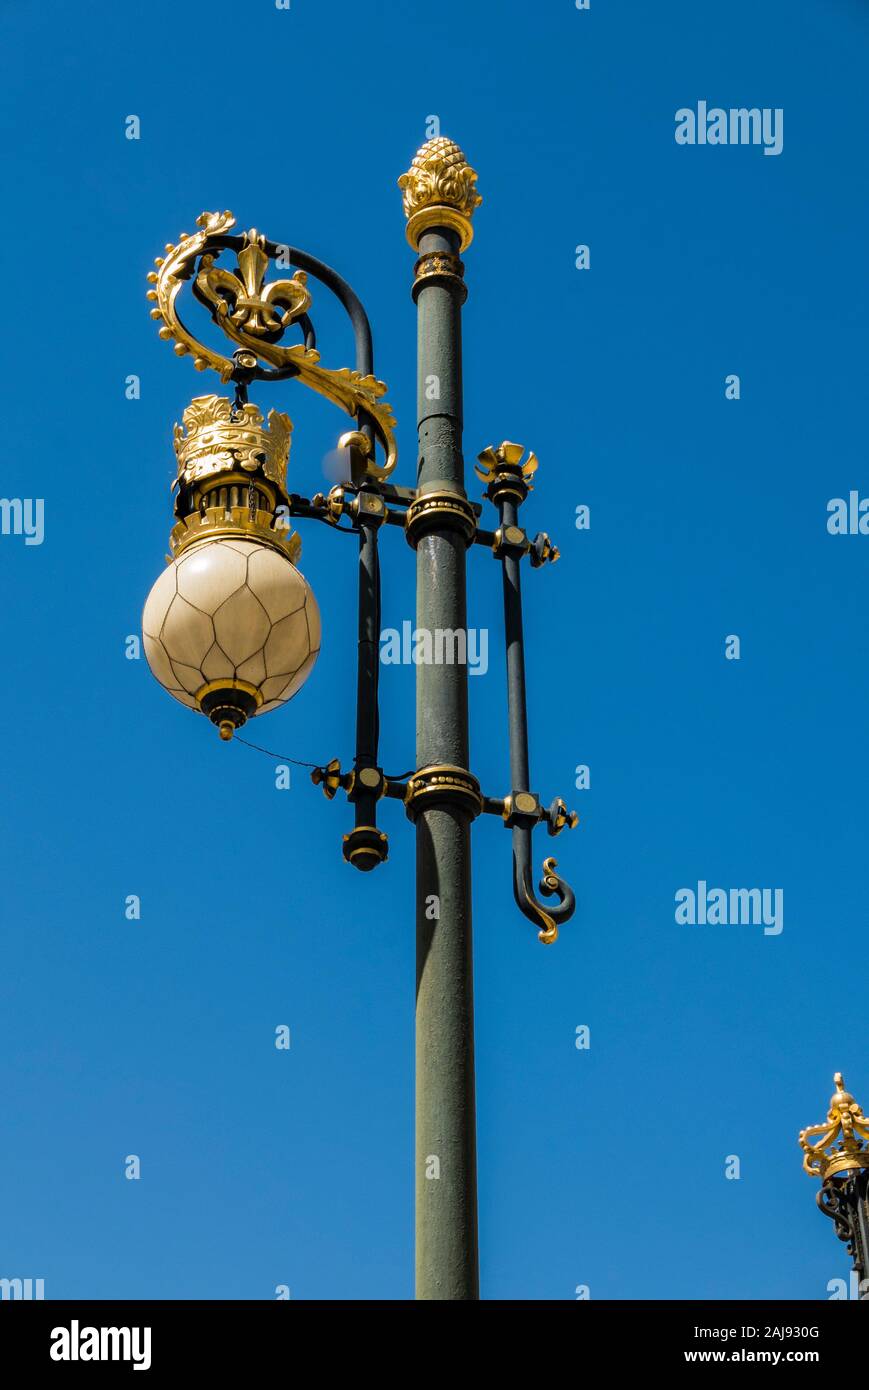 Lamppost outside the railings of the Royal Palace, Madrid, Spain Stock Photo